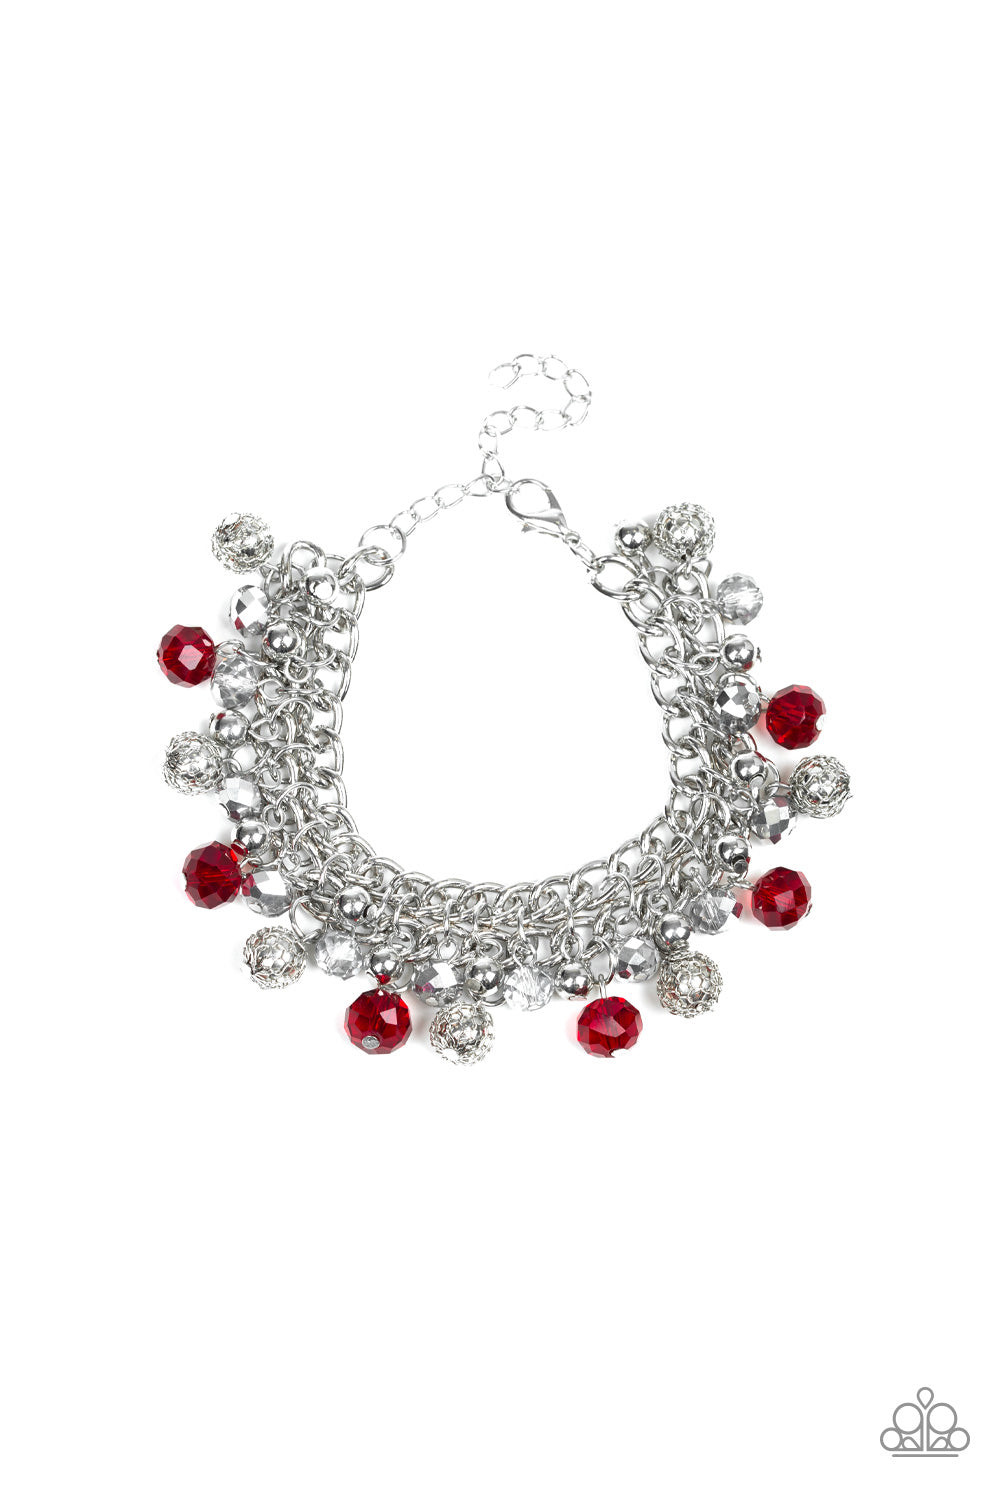 Paparazzi bracelets - The Party Planner - Red